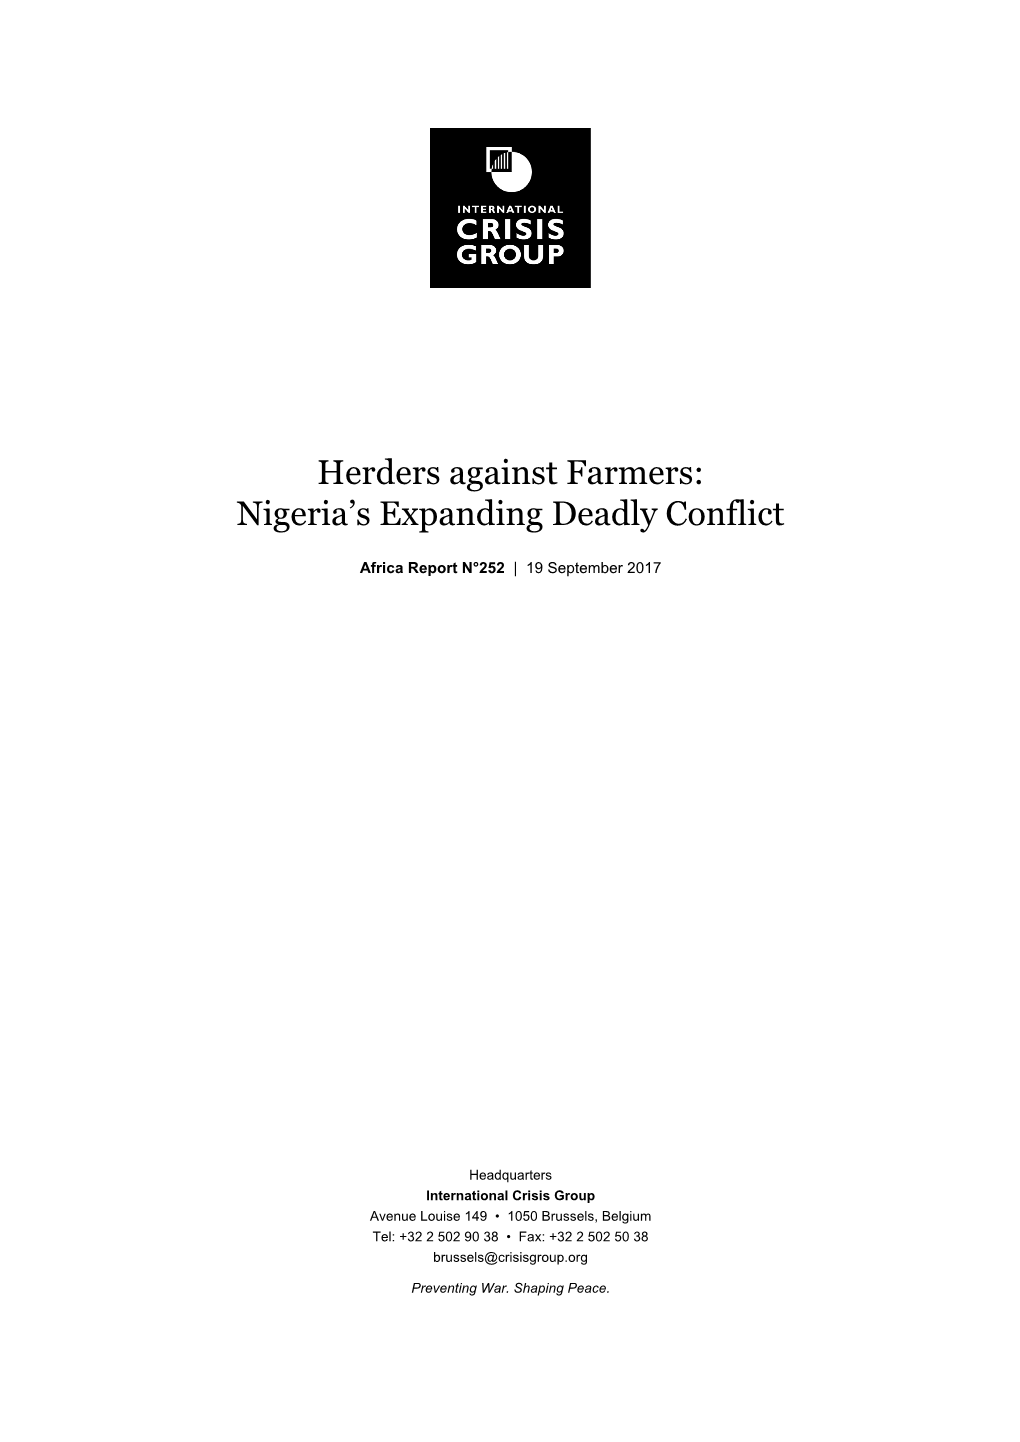 Herders Against Farmers: Nigeria's Expanding Deadly Conflict